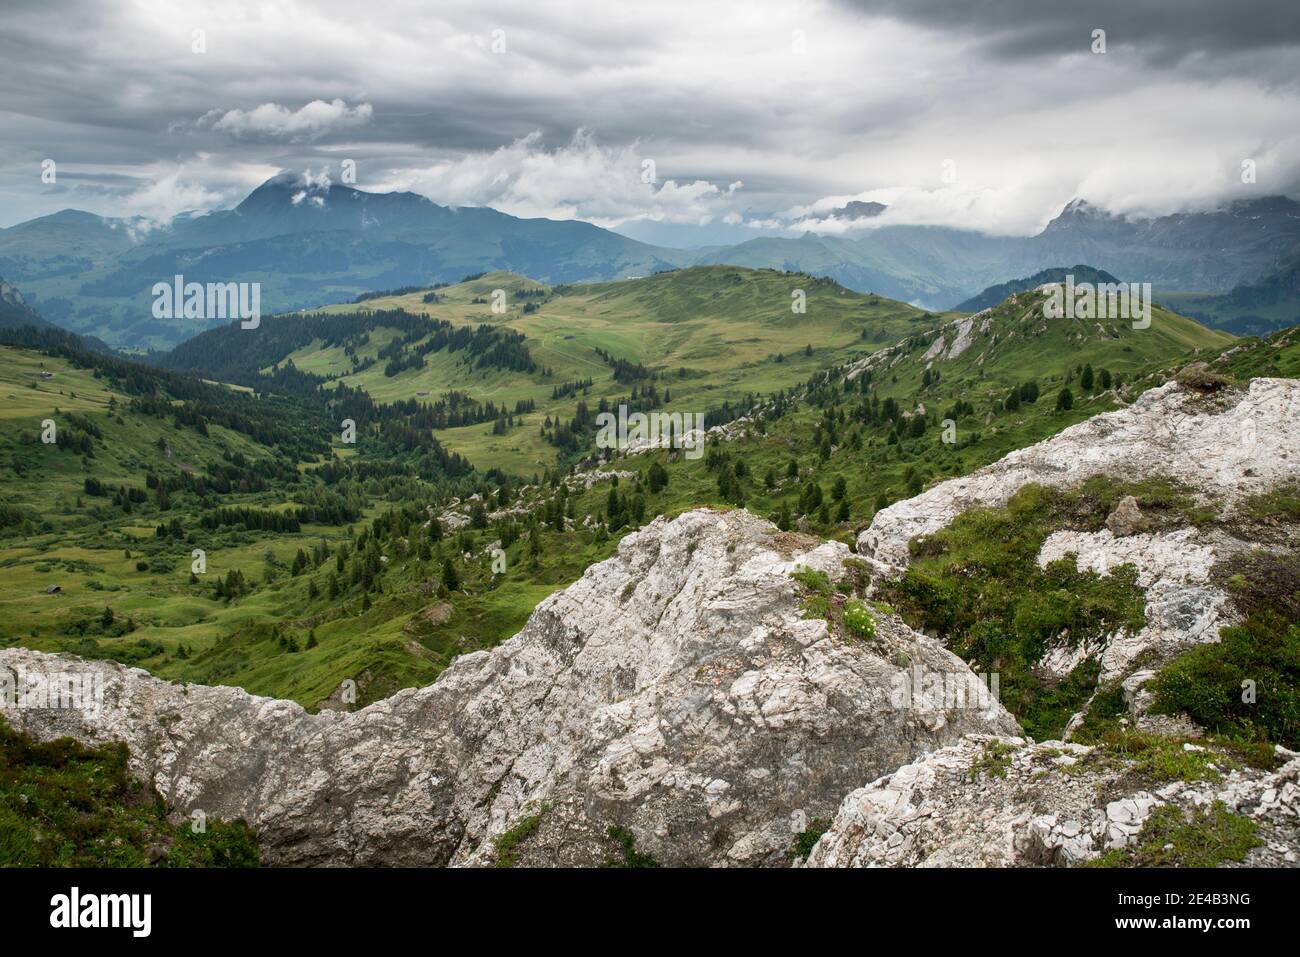 white rocks, pre-Alpine peaks in the clouds, meadows and individual trees Stock Photo